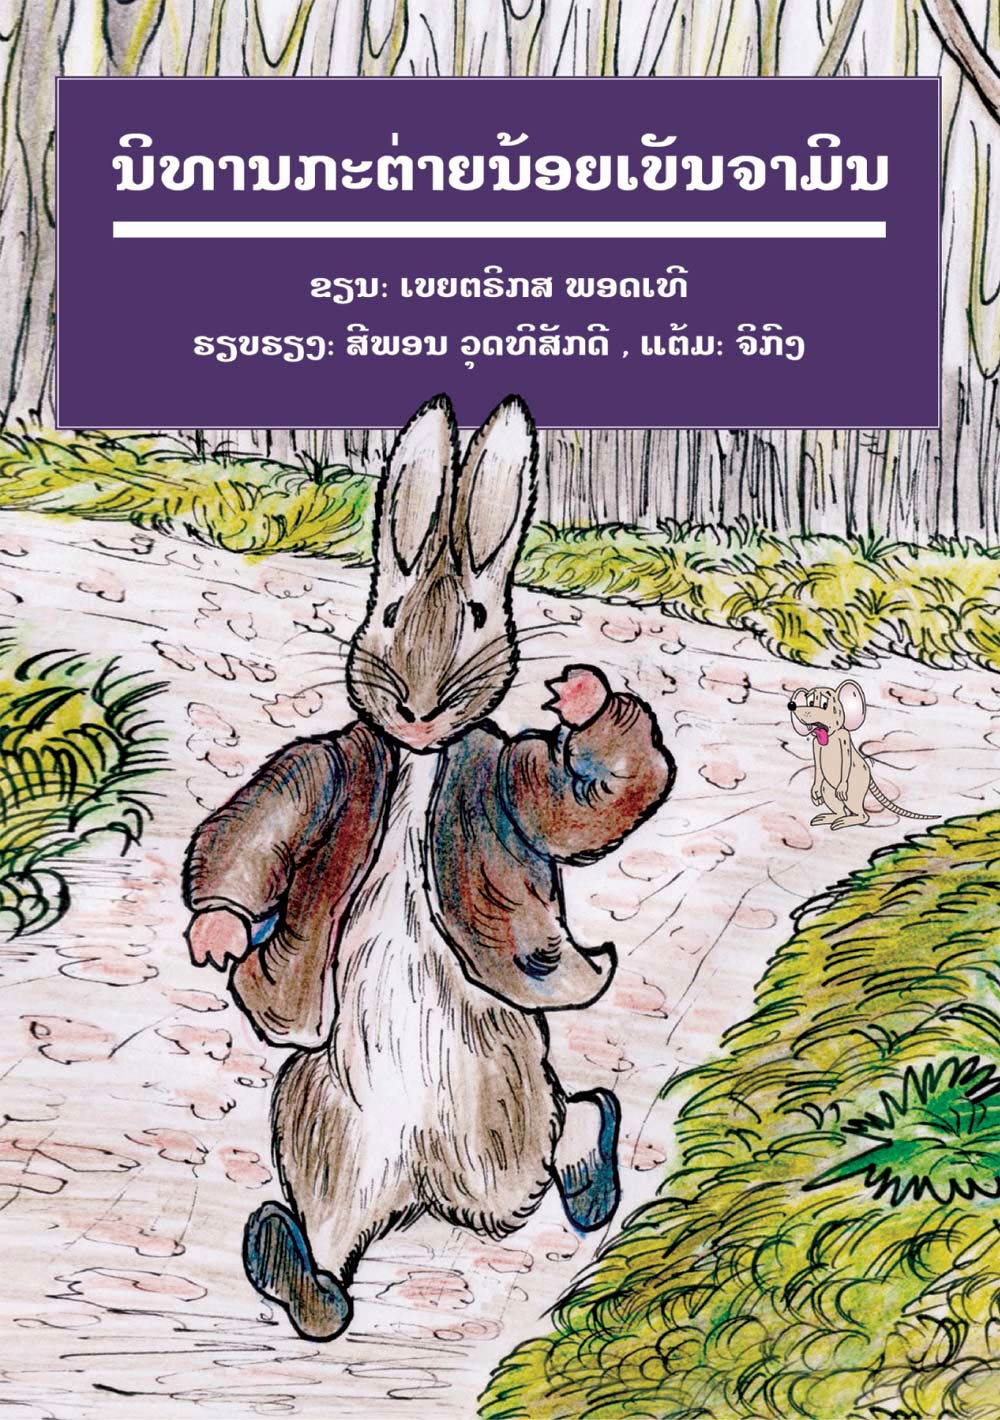 The Tale of Benjamin Bunny large book cover, published in Lao language